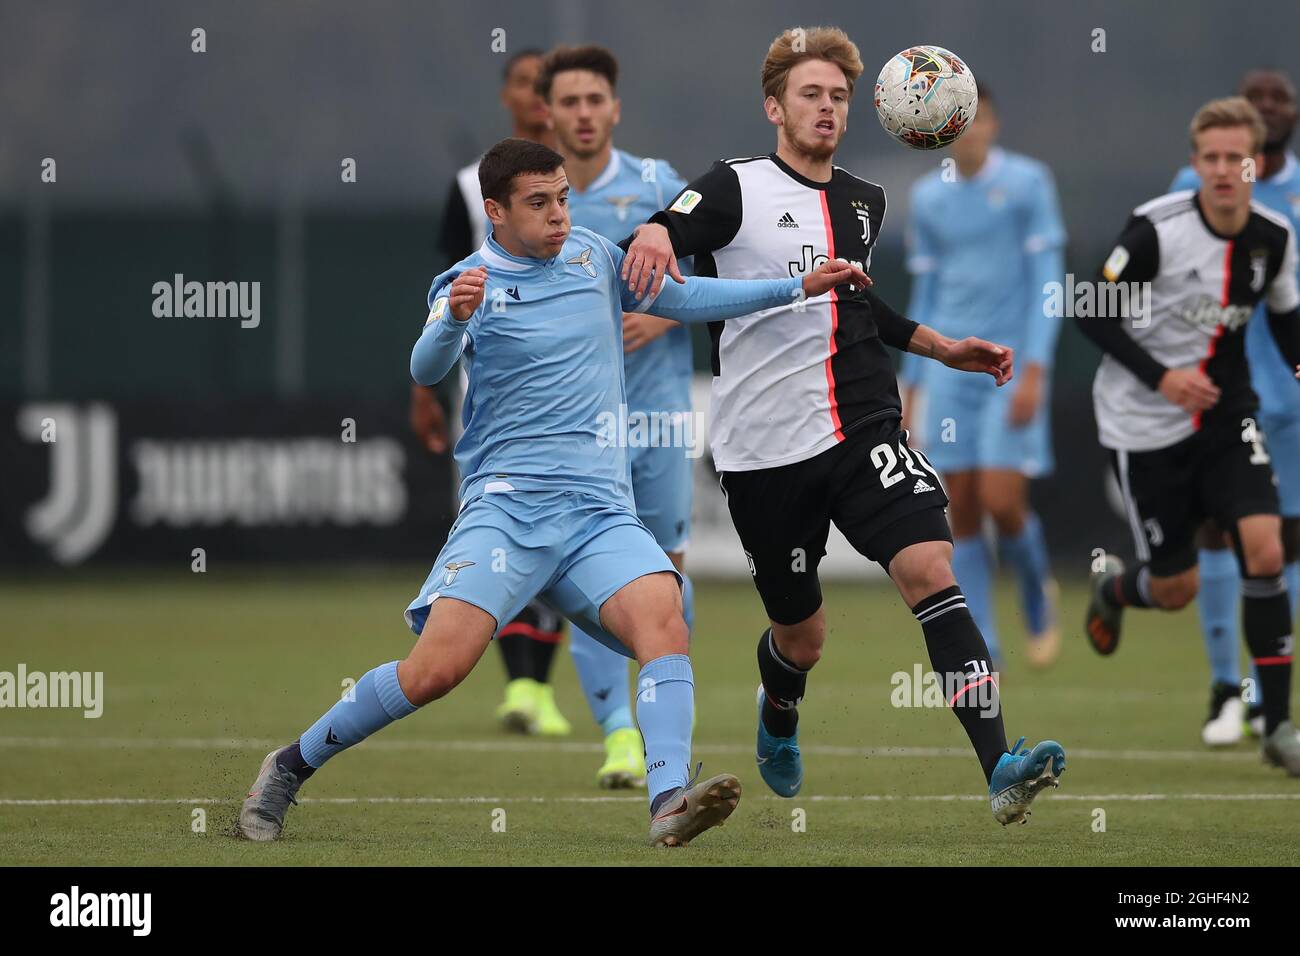 Alessandro Cerbara of Lazio and Erik Gerbi of Juventus during the Campionato Primavera match at the Juventus Center, Vinovo. Picture date: 10th November 2019. Picture credit should read: Jonathan Moscrop/Sportimage via PA Images Stock Photo